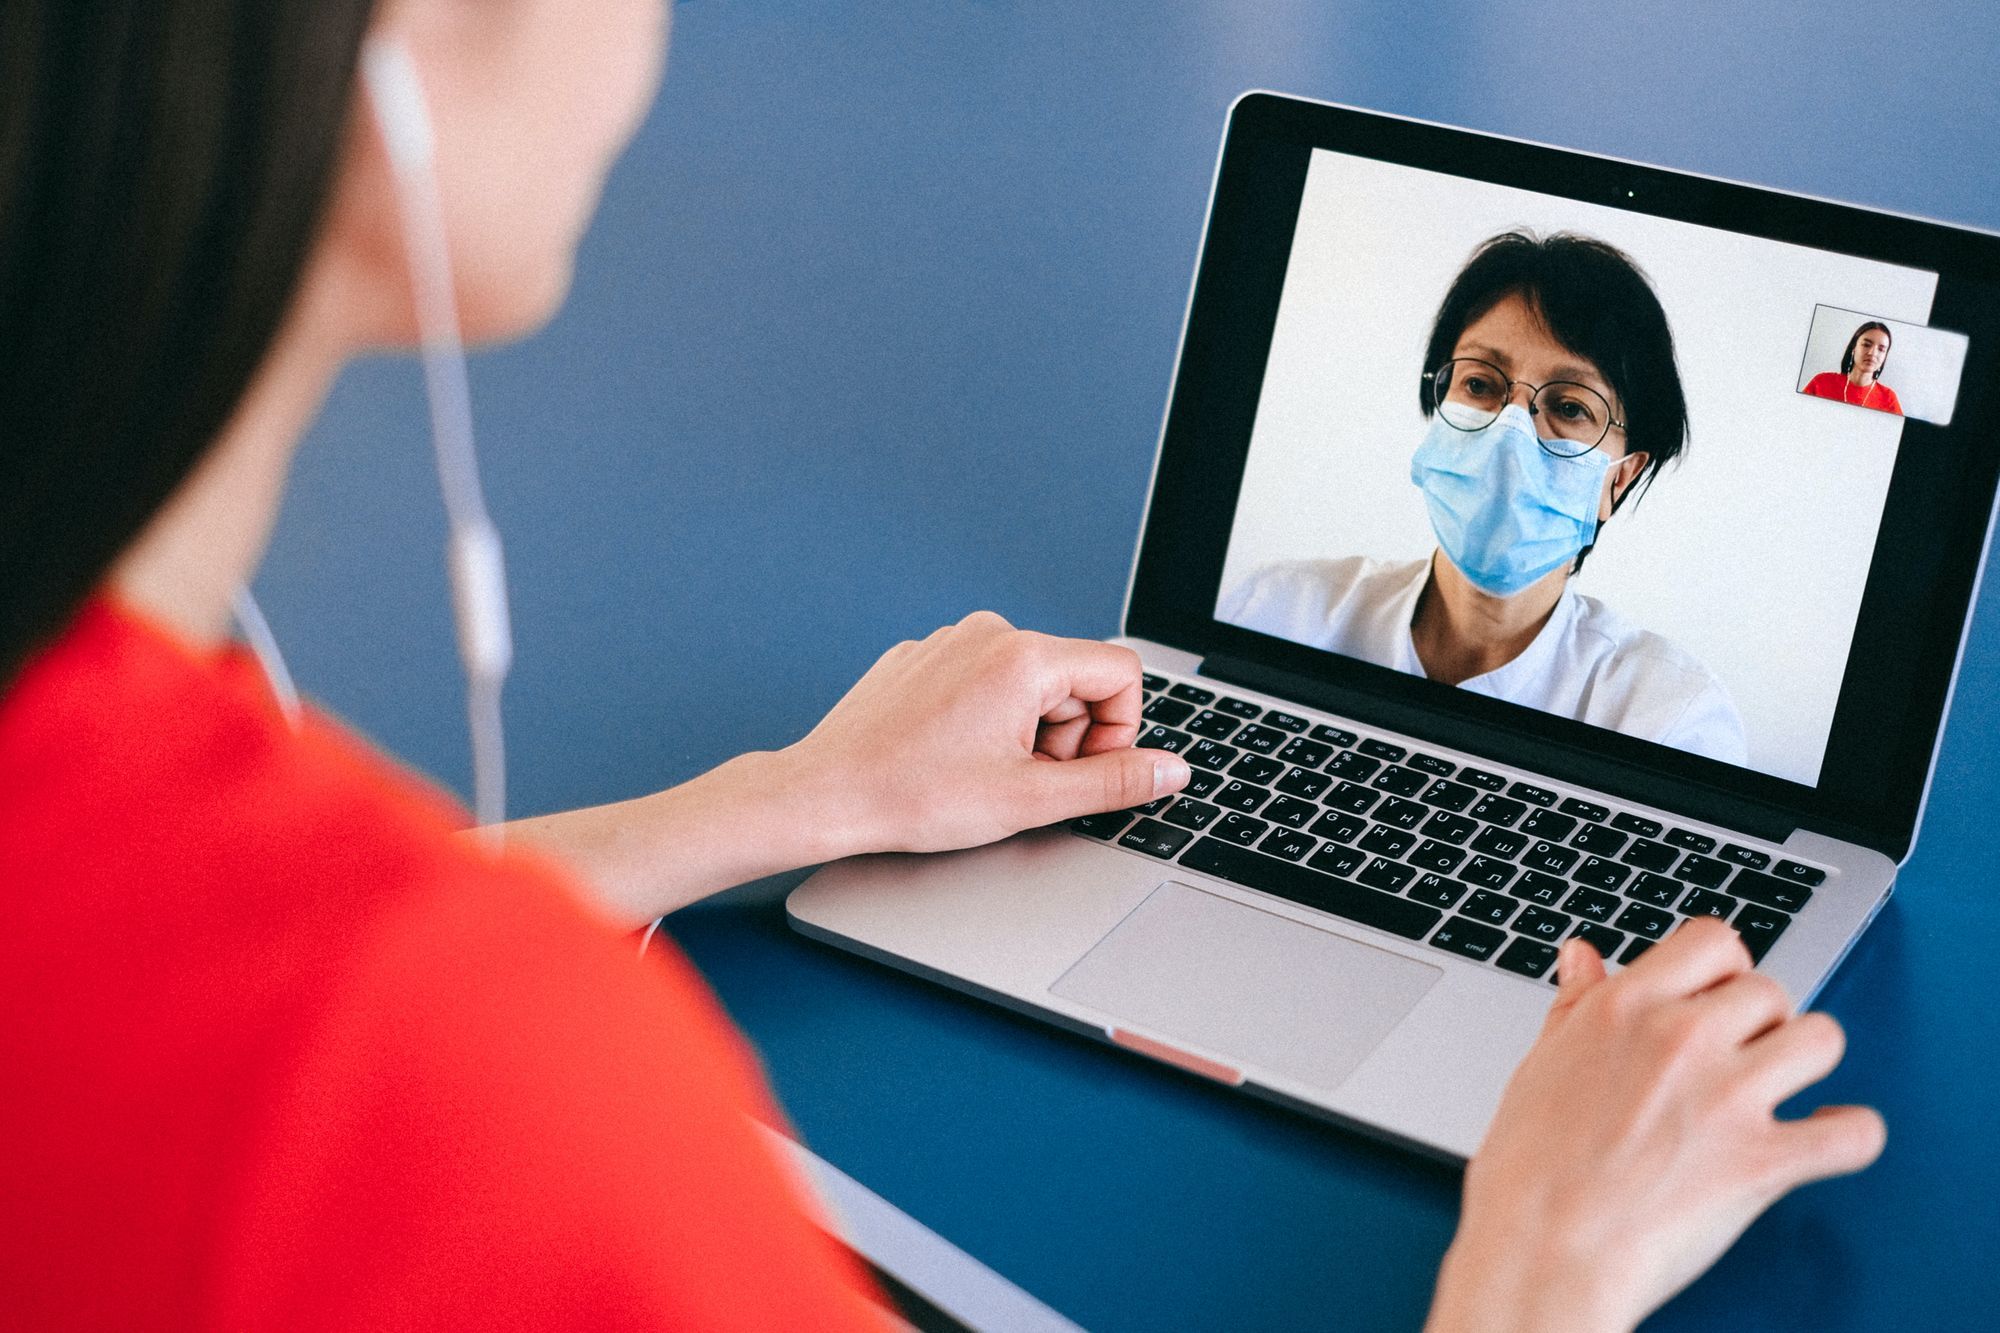 What's so great about telemedicine?